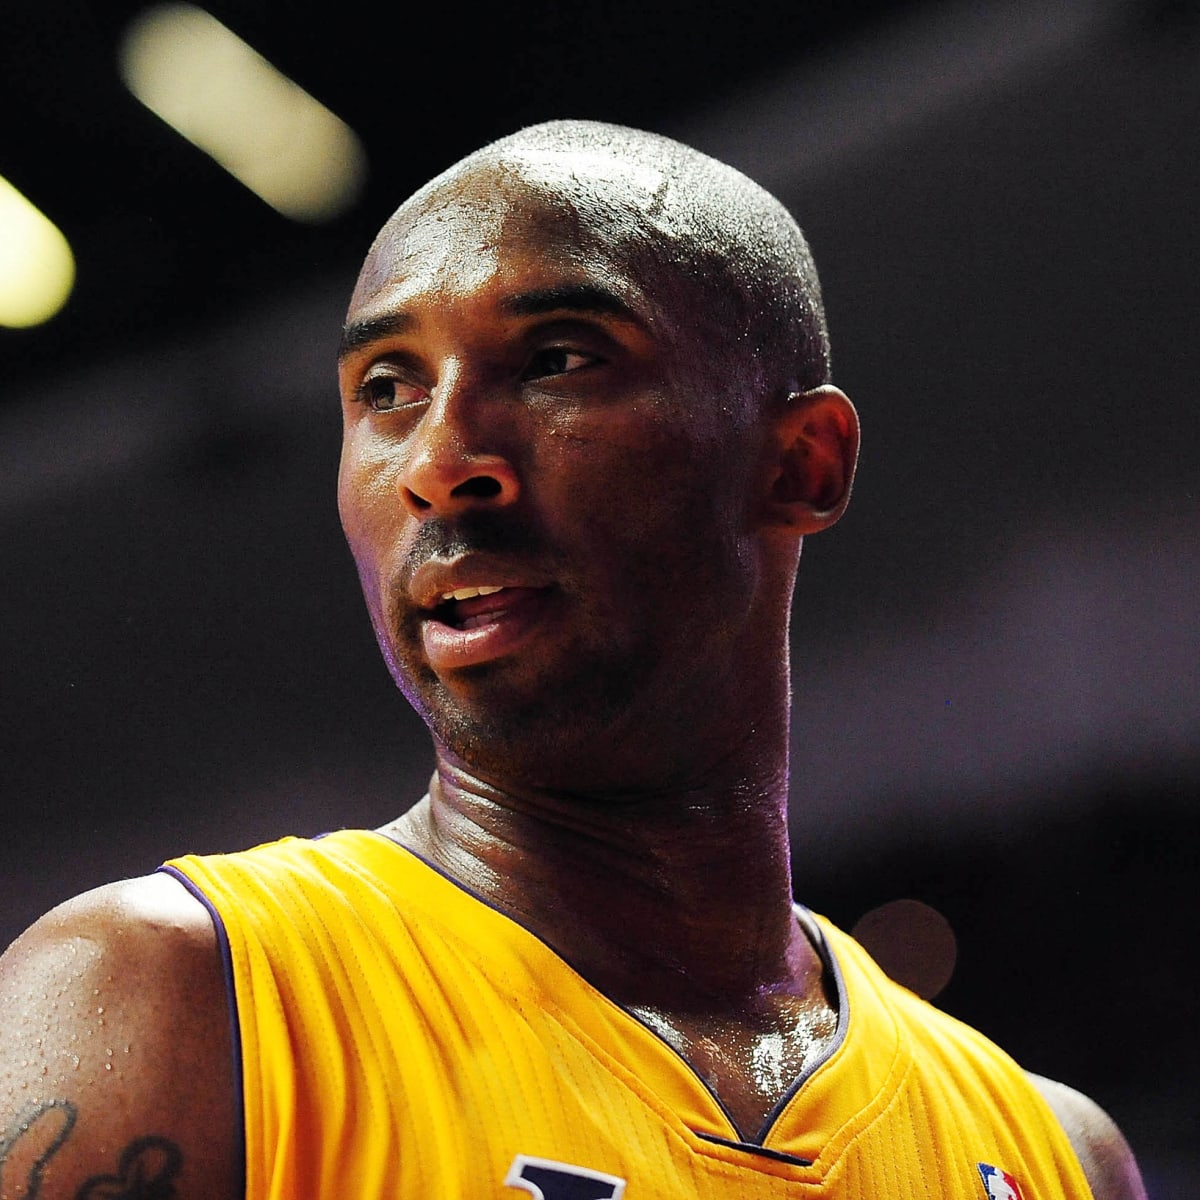 Lakers: How Four Air-Balls Helped Make Kobe Bryant a Playoff